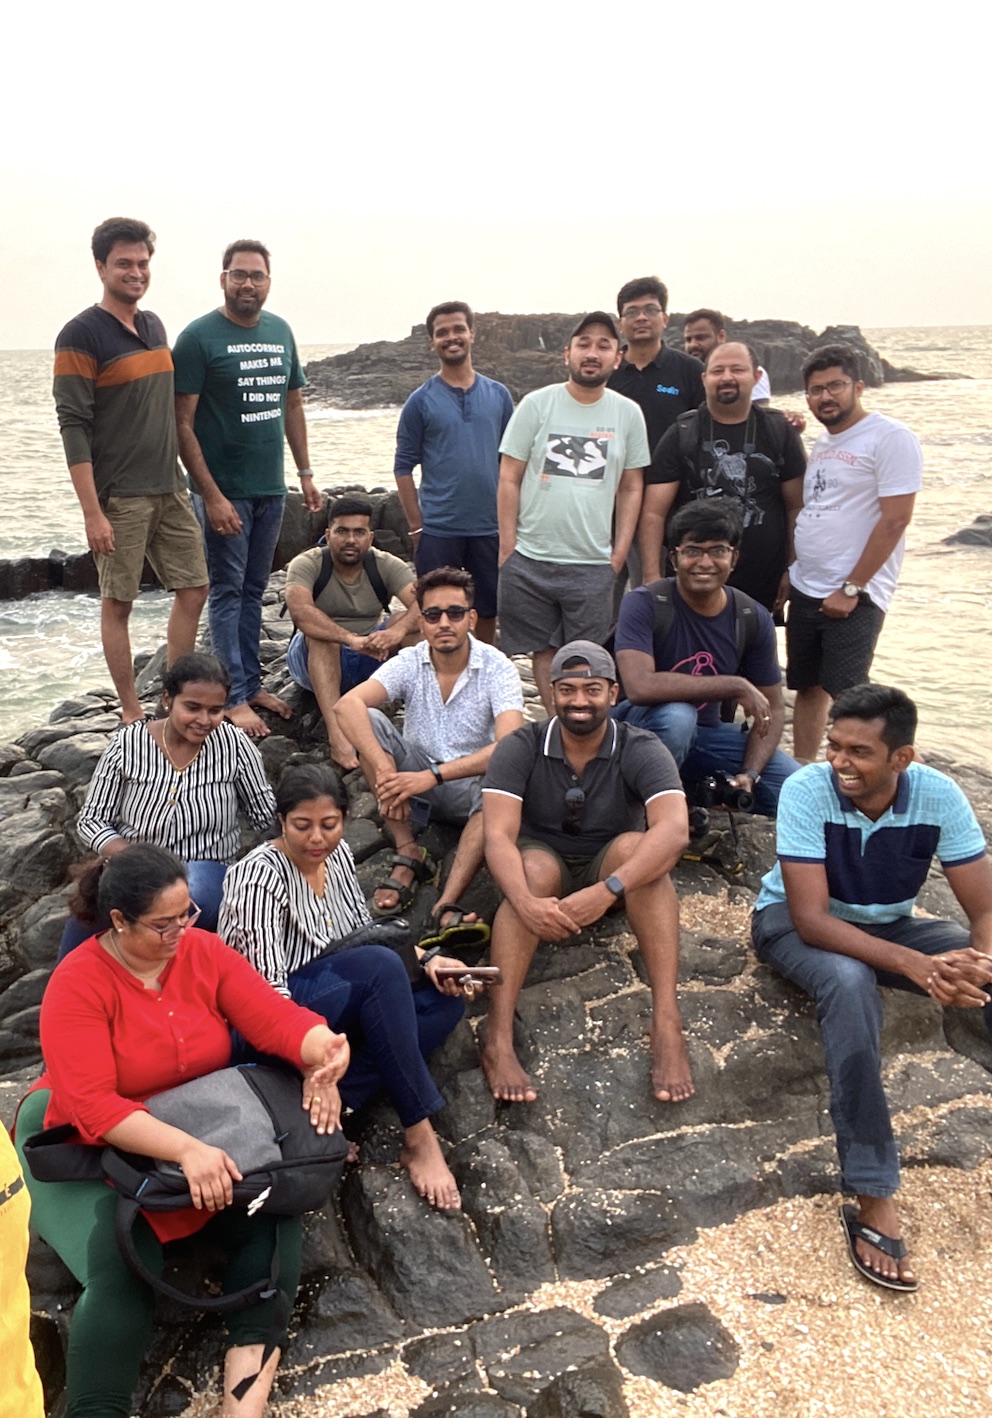 A group of smiling Tarkans, some sitting and some standing, on the smooth rocks of a coastline